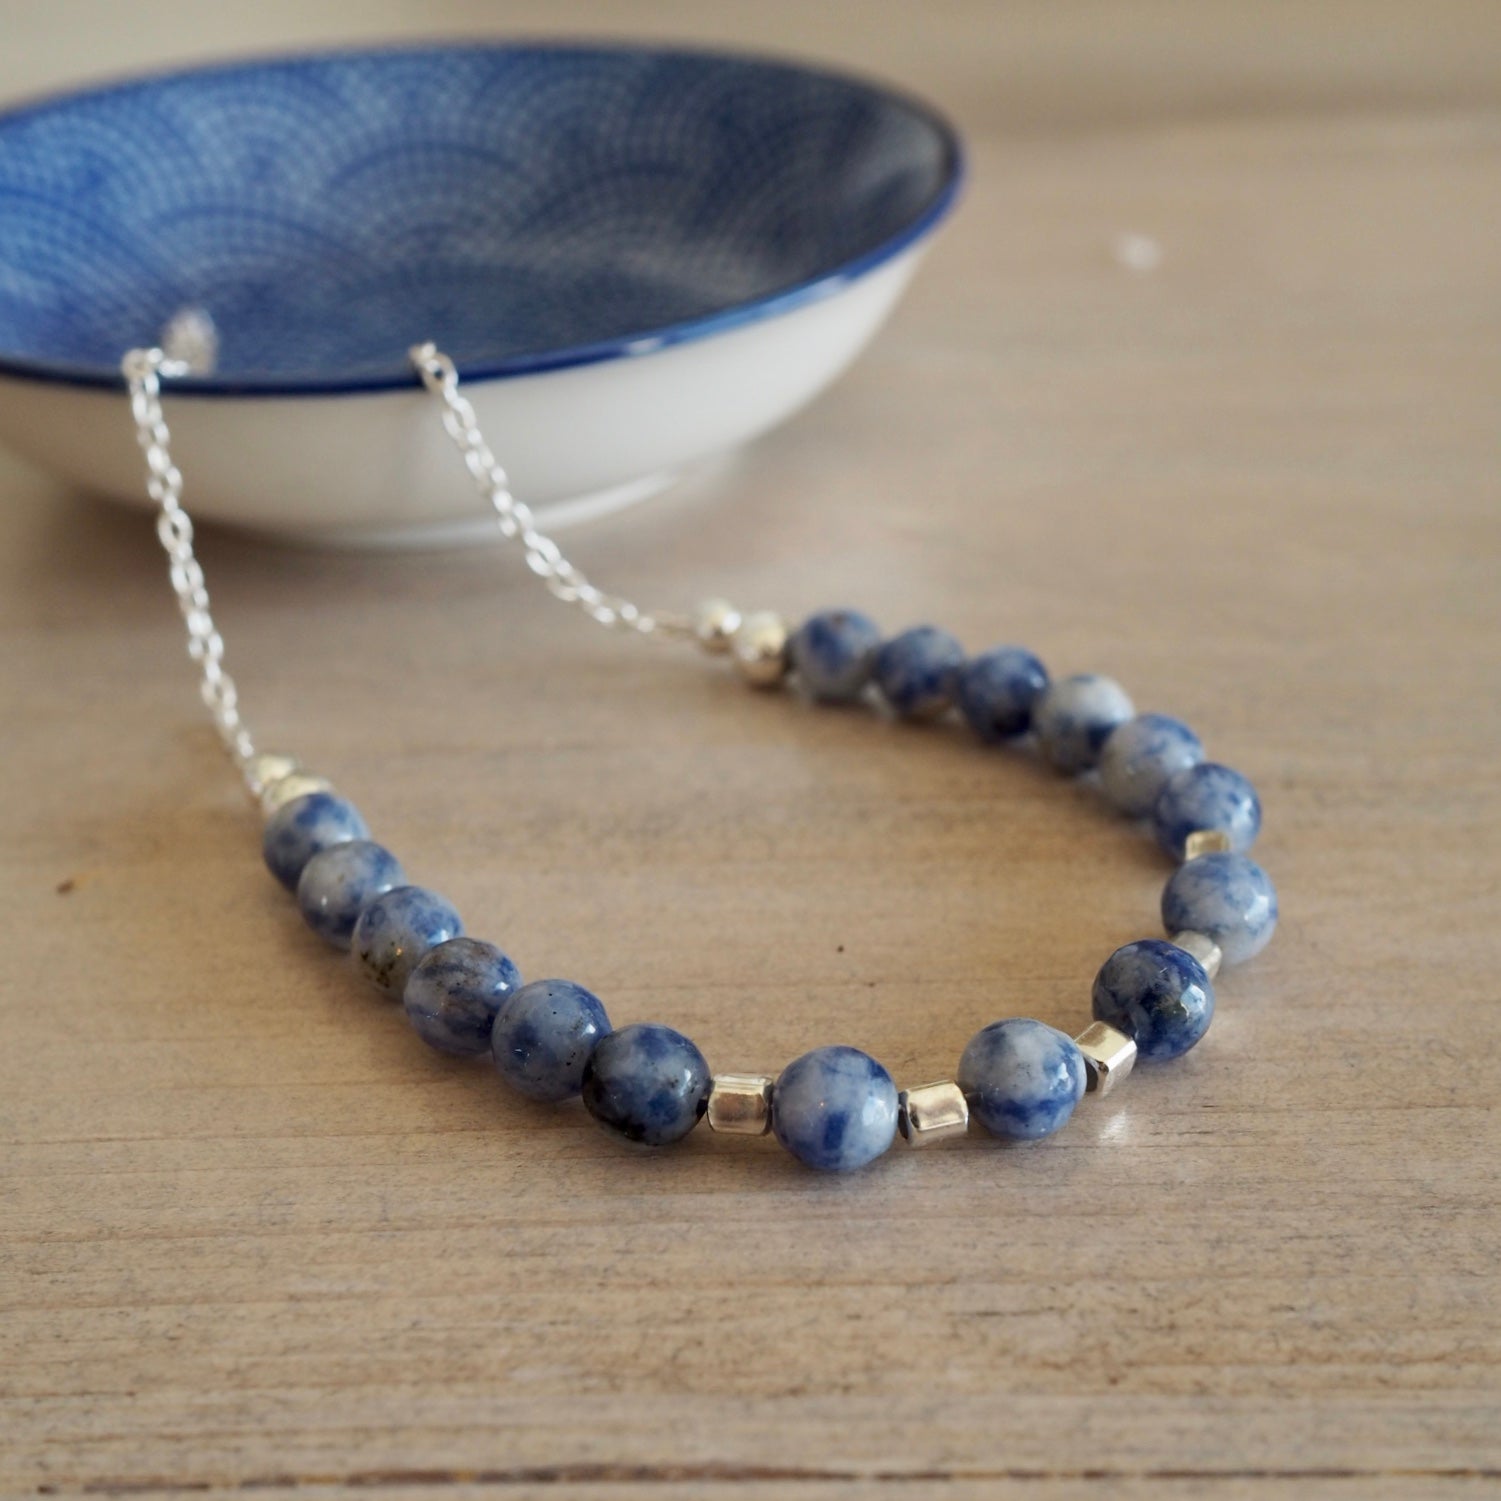 Blue Gemstone Necklace with Sterling Silver by Wallis Designs